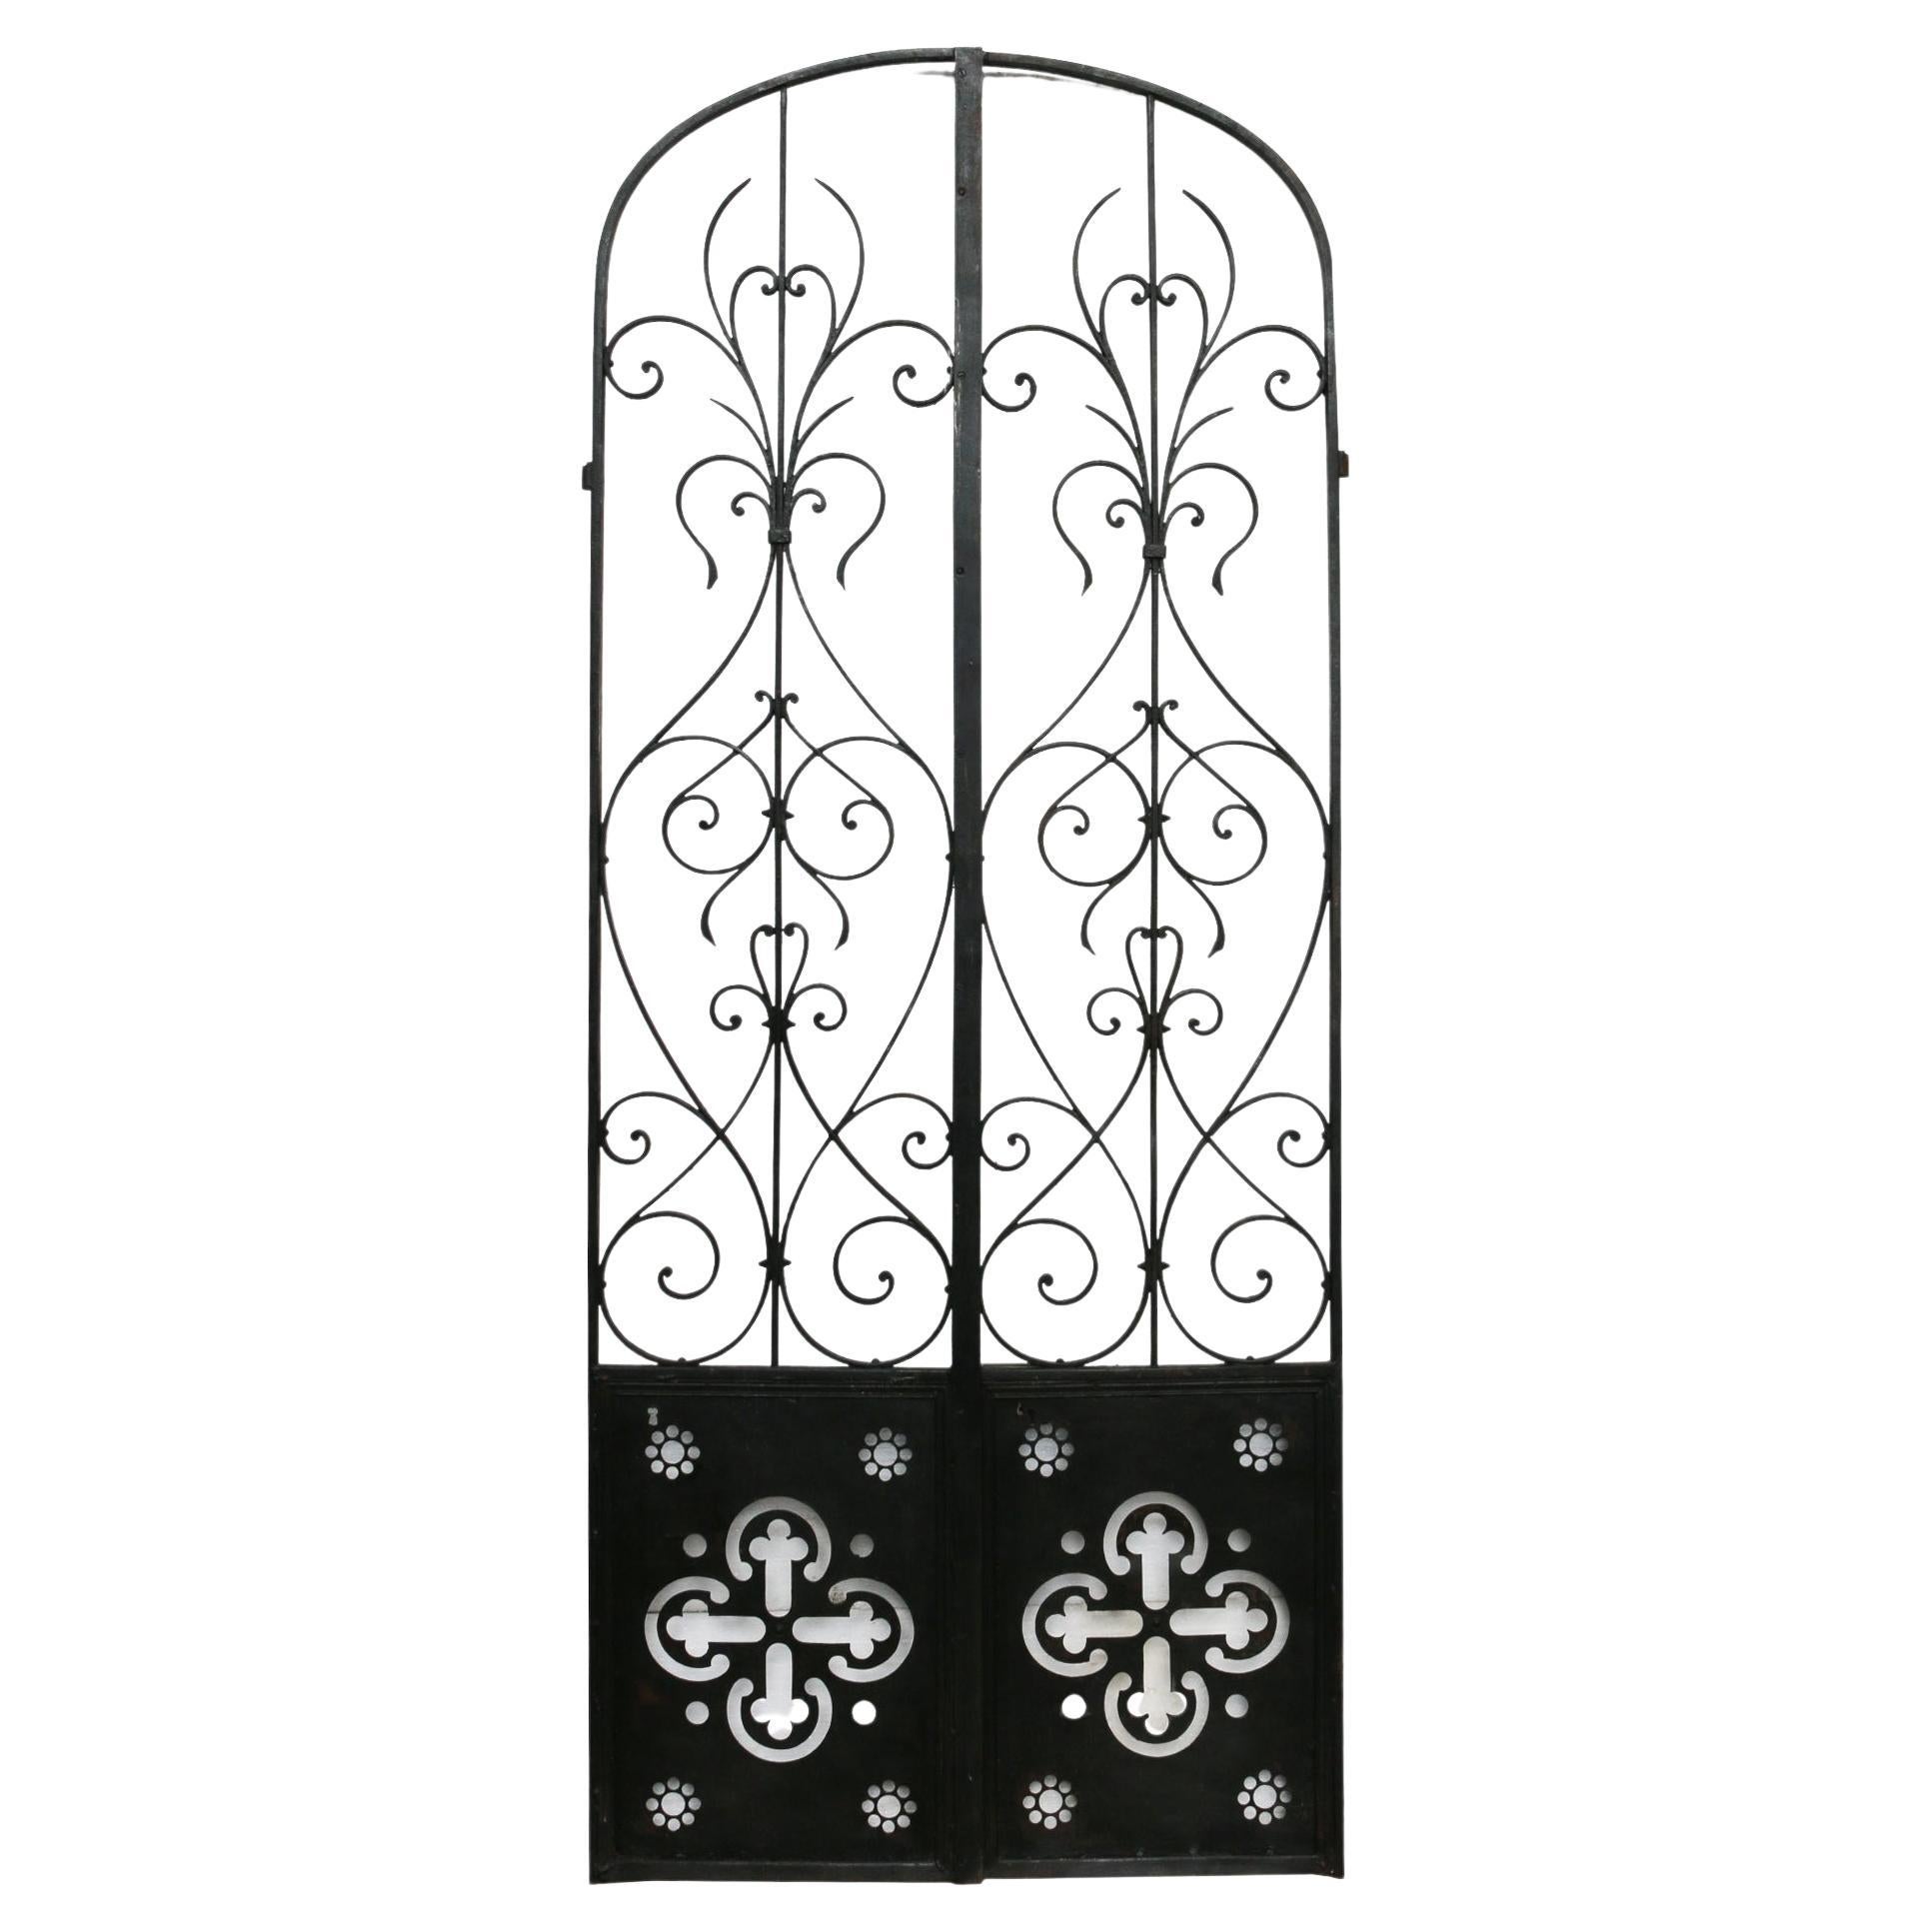 Set of Antique Wrought Iron Arched Gates